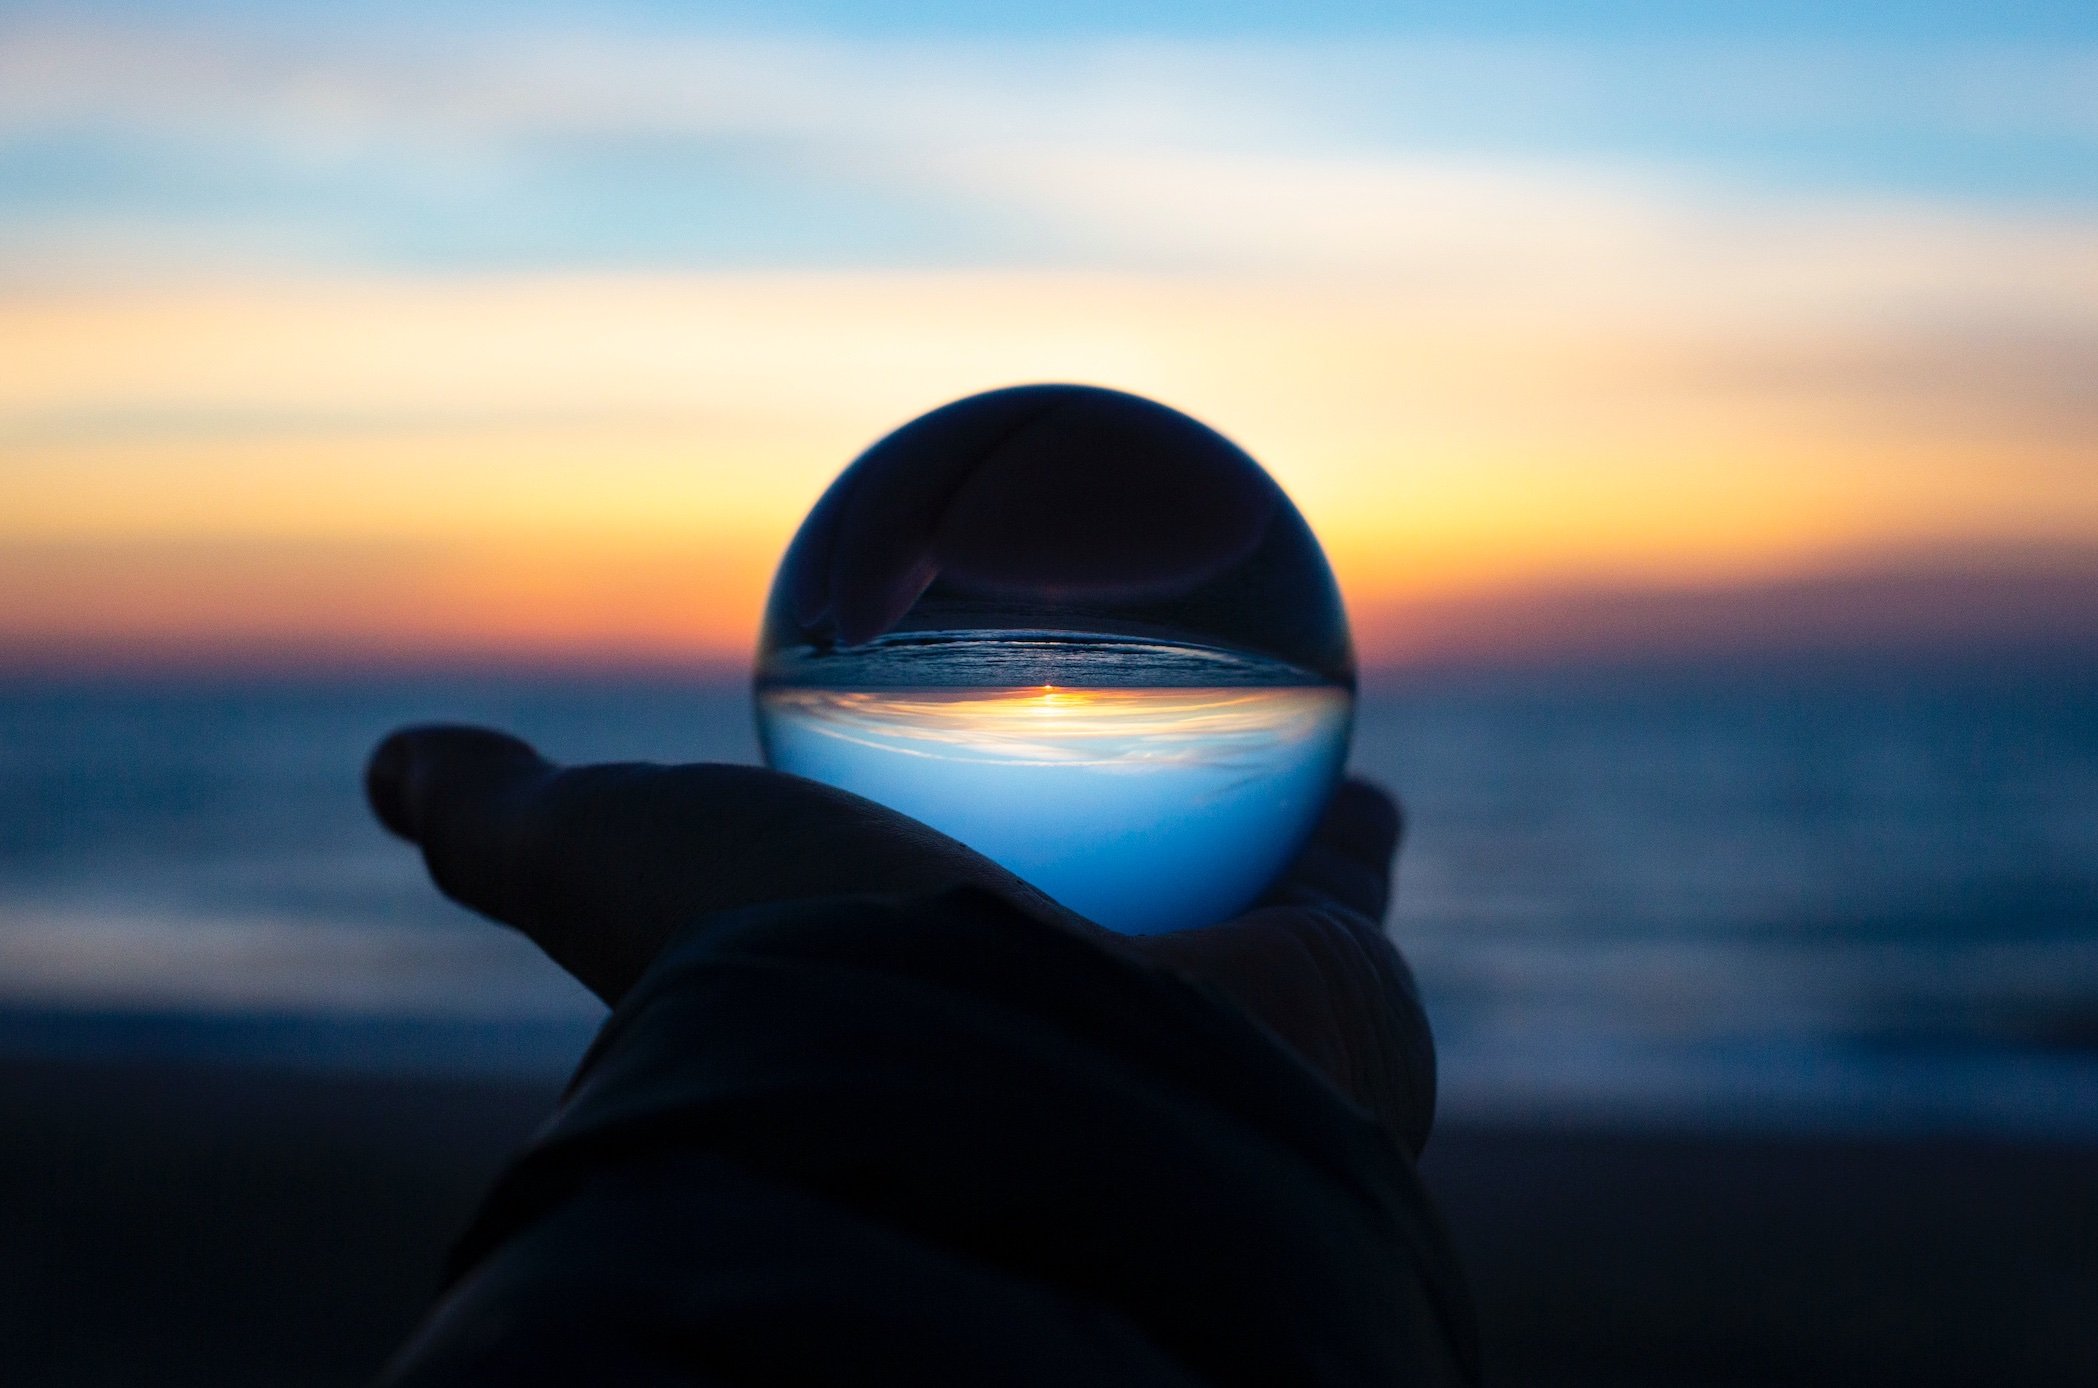 Person holding crystal ball against multicolored background; image by Drew Beamer, via Unsplash.com.